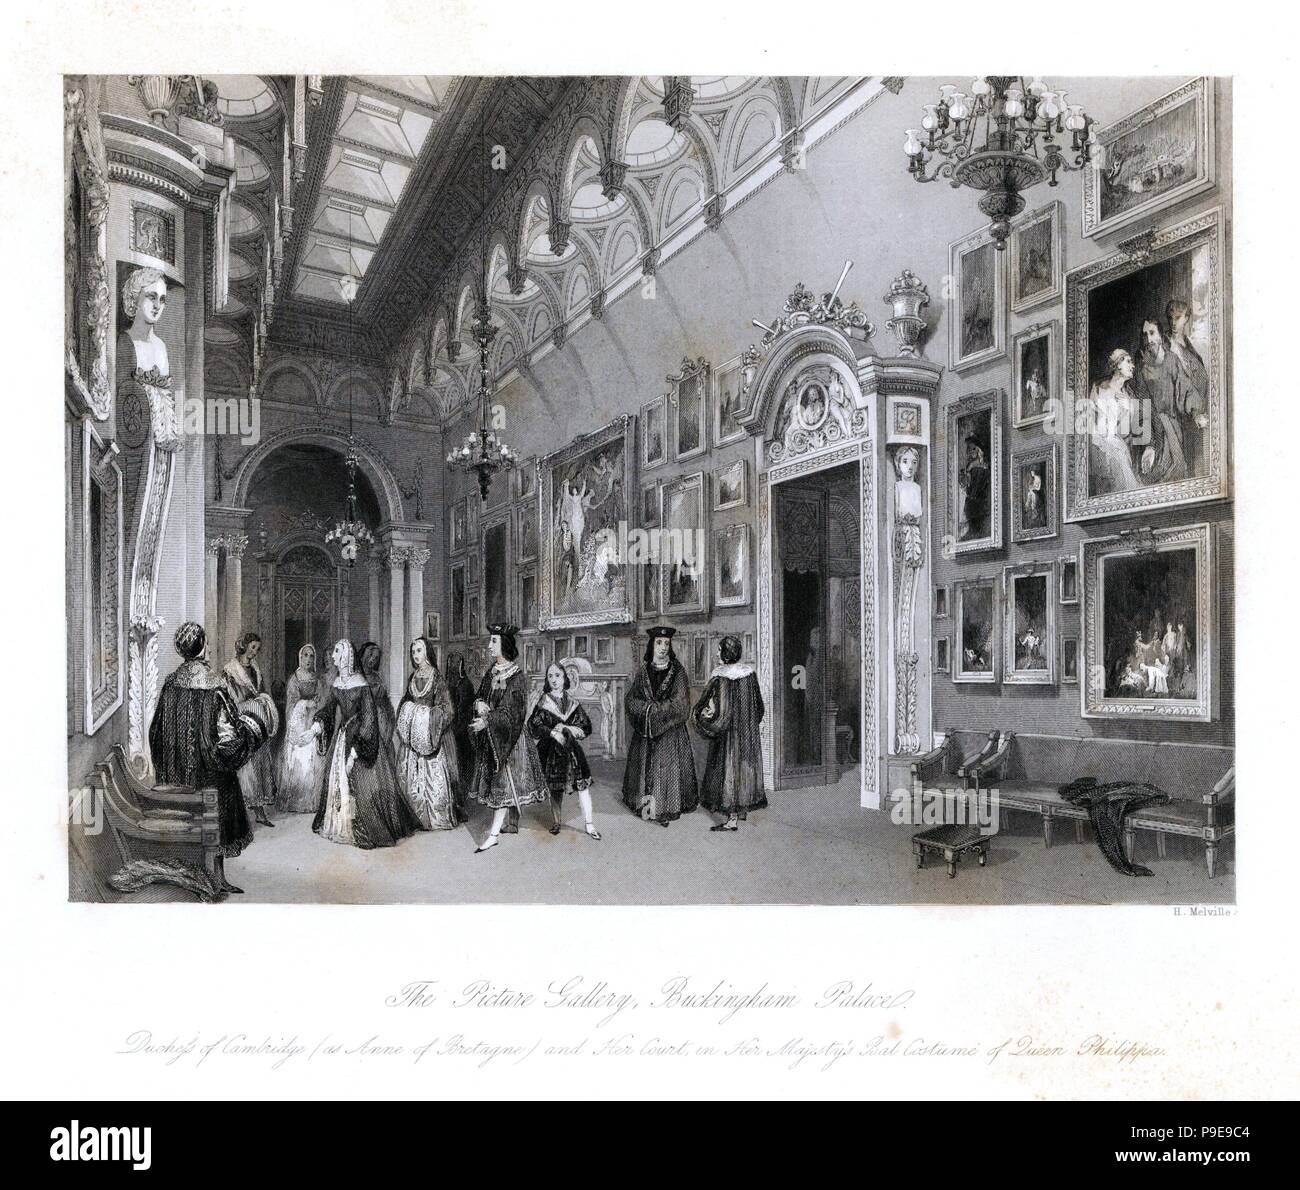 Fancy dress ball in the Picture Gallery, Buckingham Palace. The Duchess of Cambridge as Anne of Bretagne with her court at Queen Victoria's Bal Costume of Queen Philippa, May 12, 1842. Steel engraving by Henry Melville from London Interiors, Their Costumes and Ceremonies, Joshua Mead, London, 1841. Stock Photo